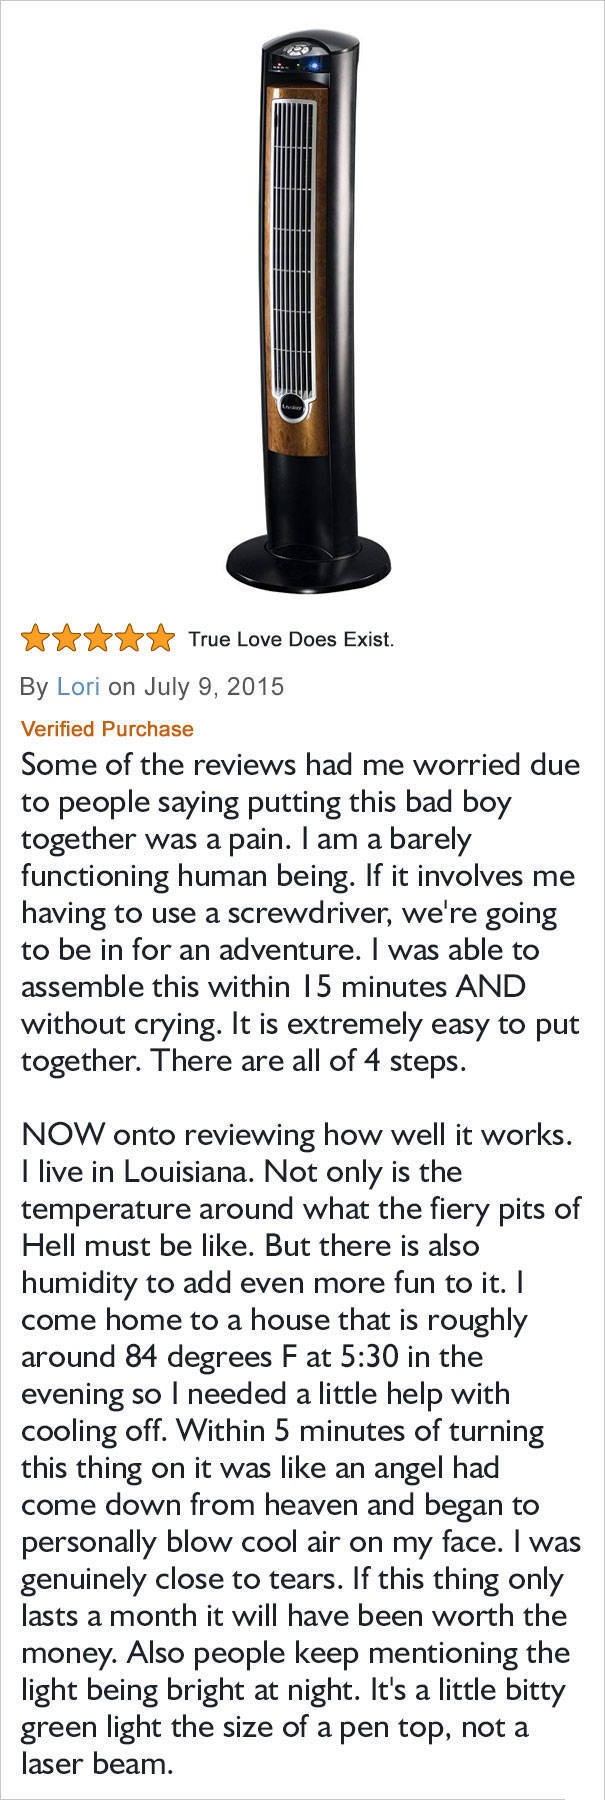 amazon reviews - True Love Does Exist. By Lori on Verified Purchase Some of the reviews had me worried due to people saying putting this bad boy together was a pain. I am a barely functioning human being. If it involves me having to use a screwdriver, we'